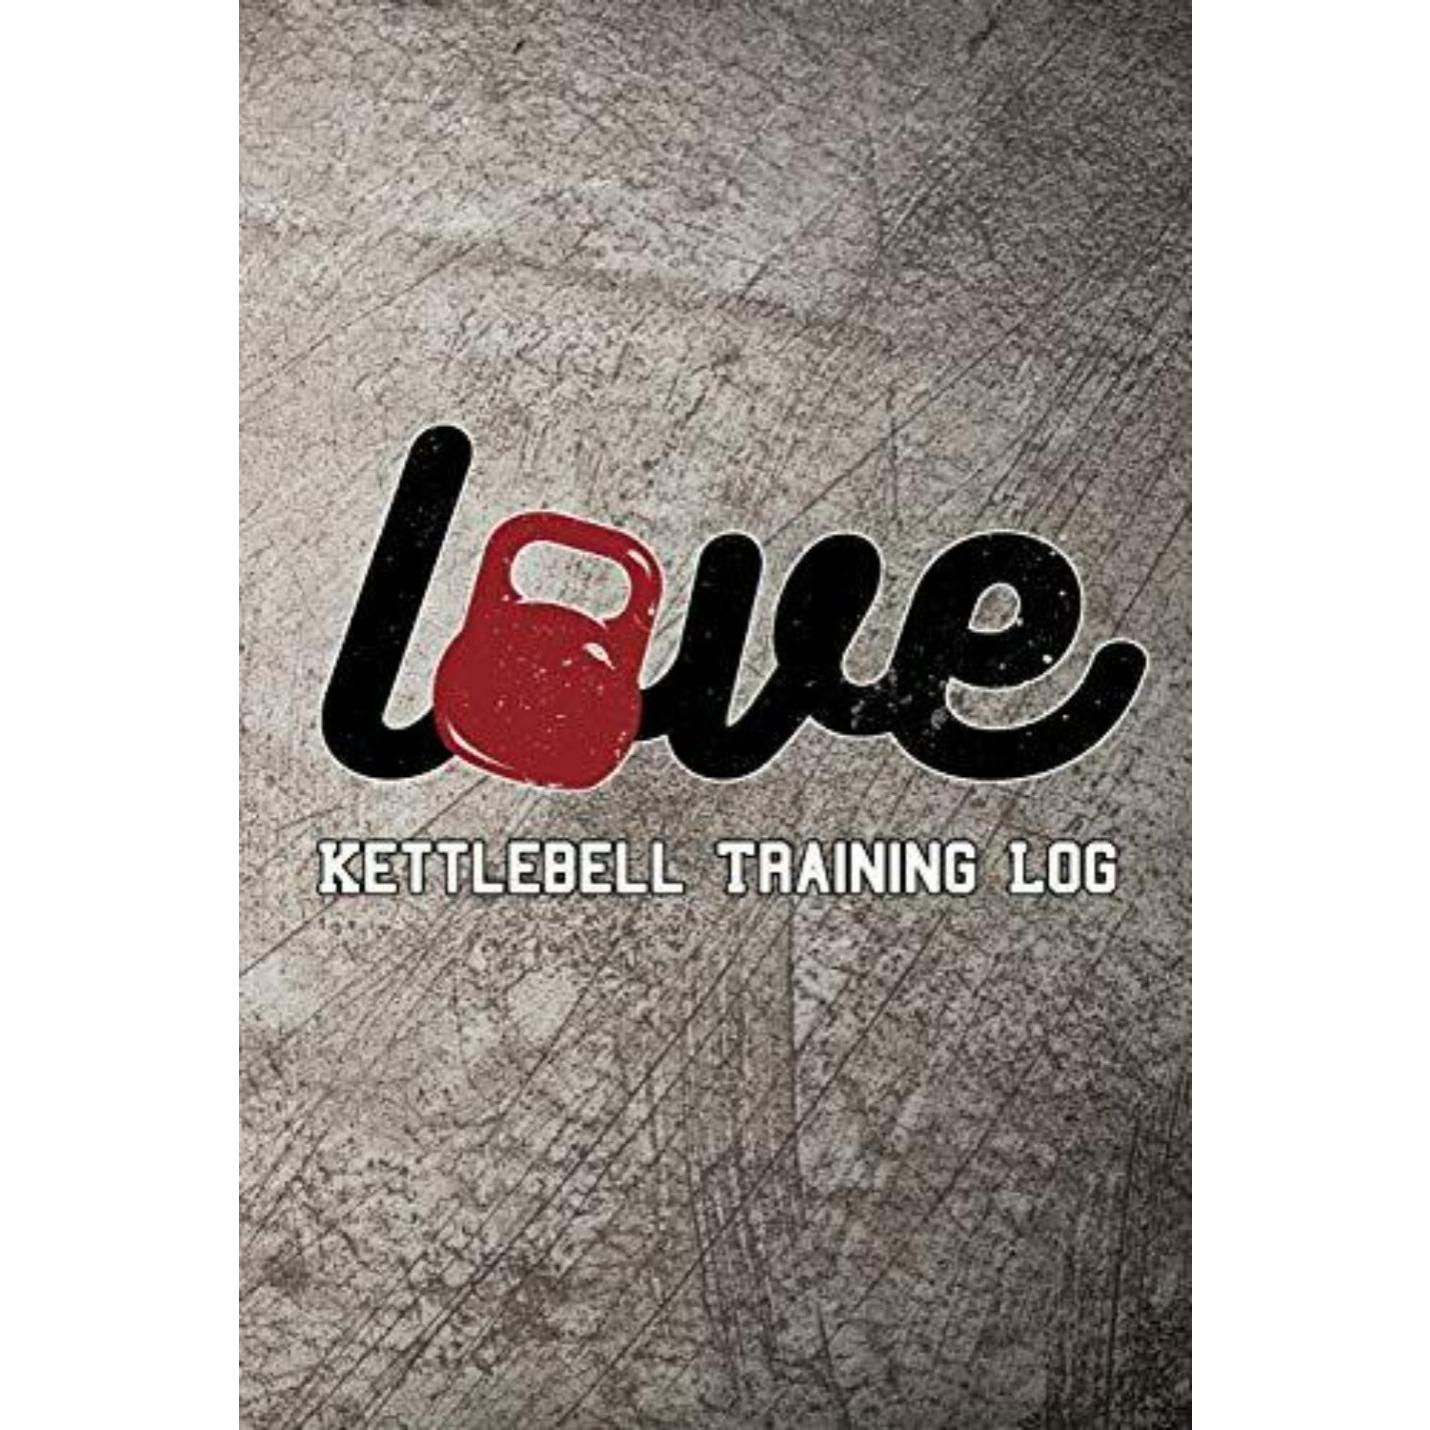 Love Kettlebell Training Log: Keep Track of Your Workout Progress - happygetfit.com